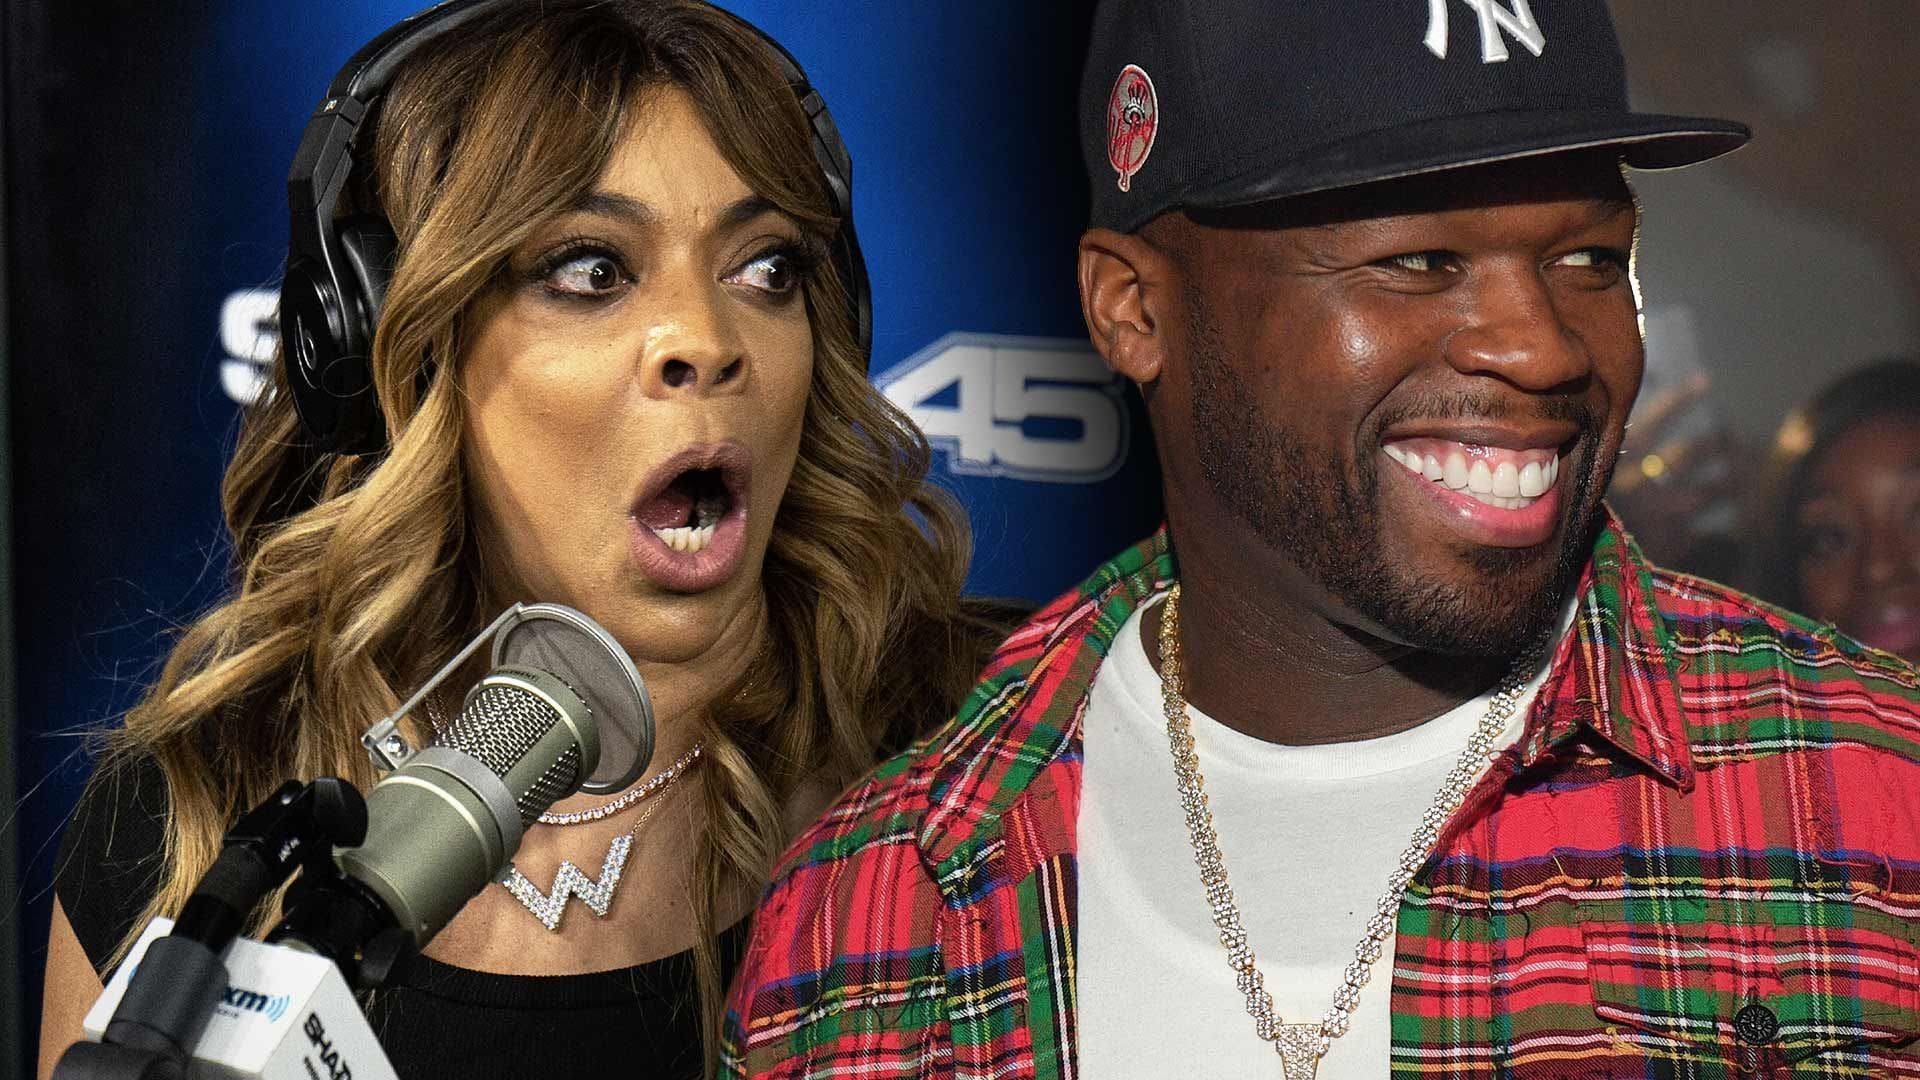 50 Cent Bashes Wendy Williams Again And Calls Her A 'Monster' - People Say He's Gone Too Far